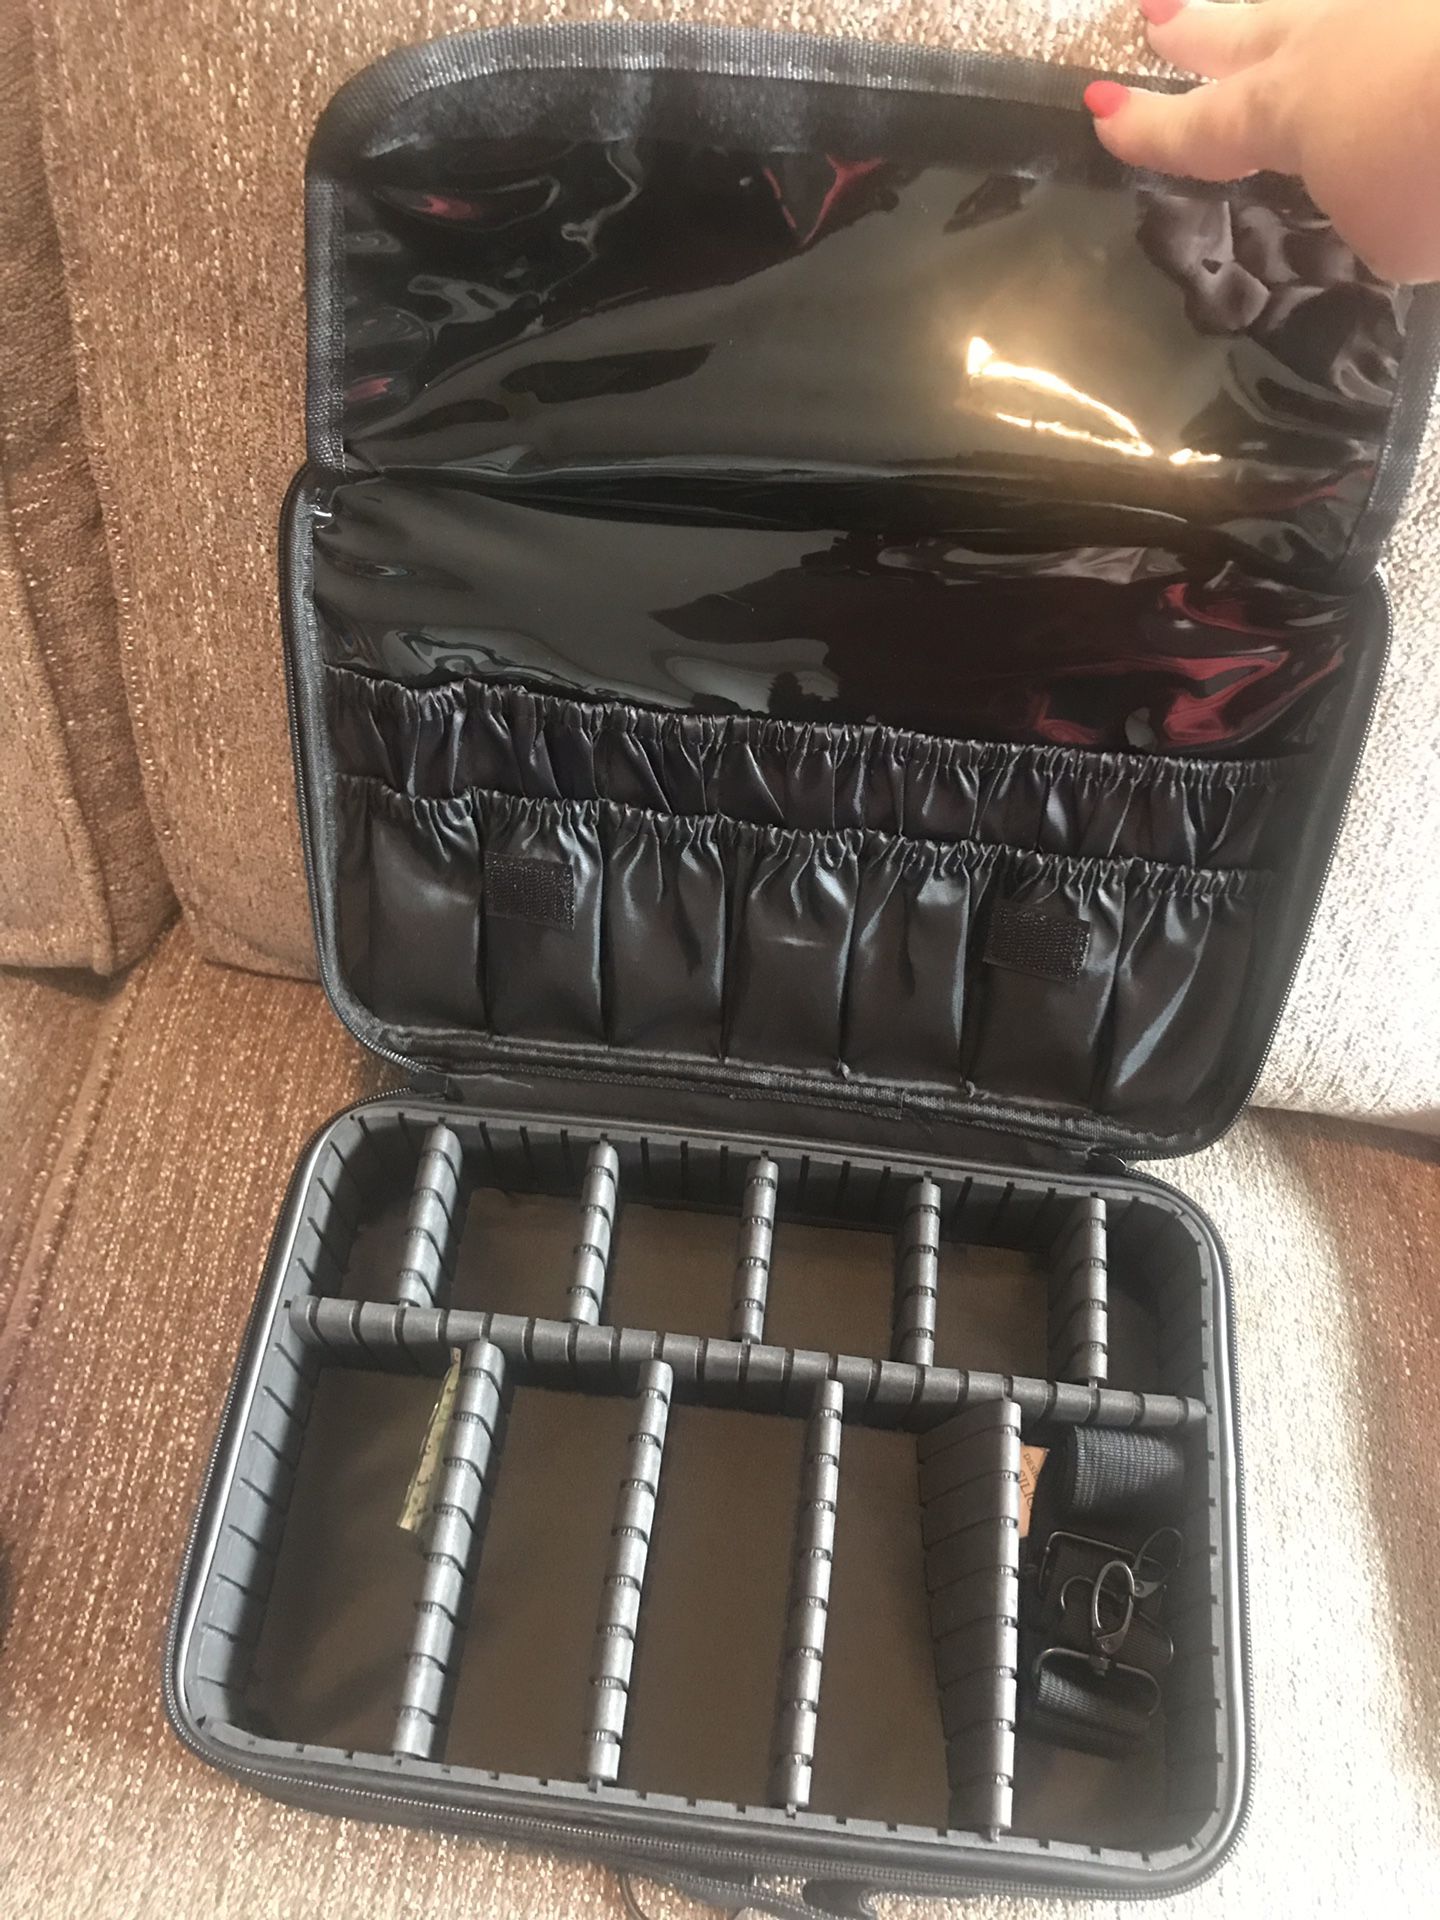 Brand new makeup case and brush holder